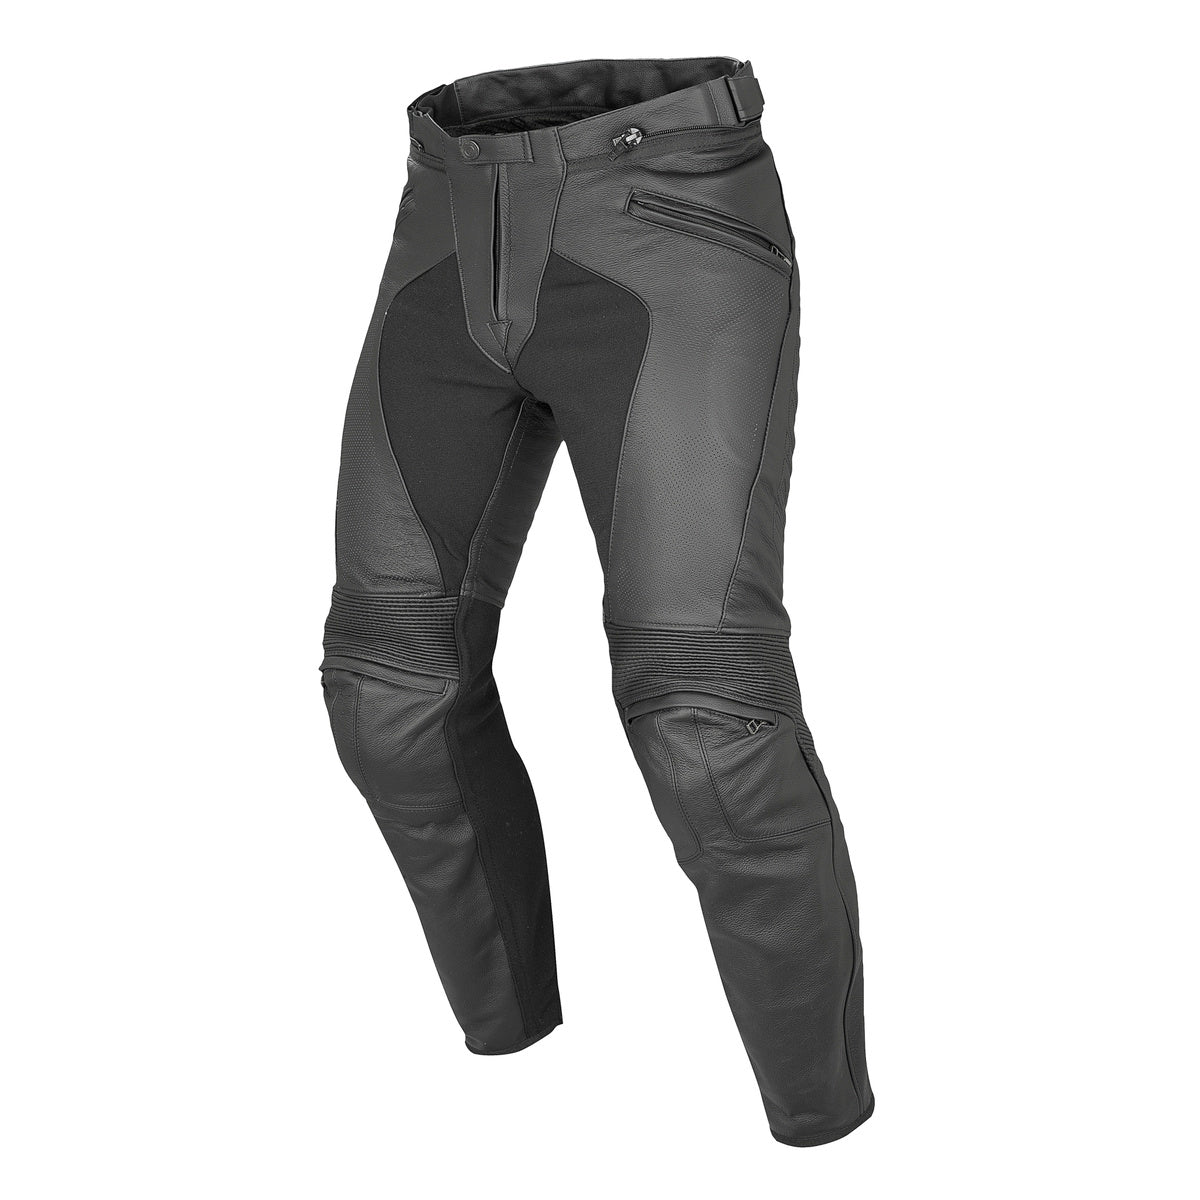 Dainese Pony C2 Perforated Leather Pants